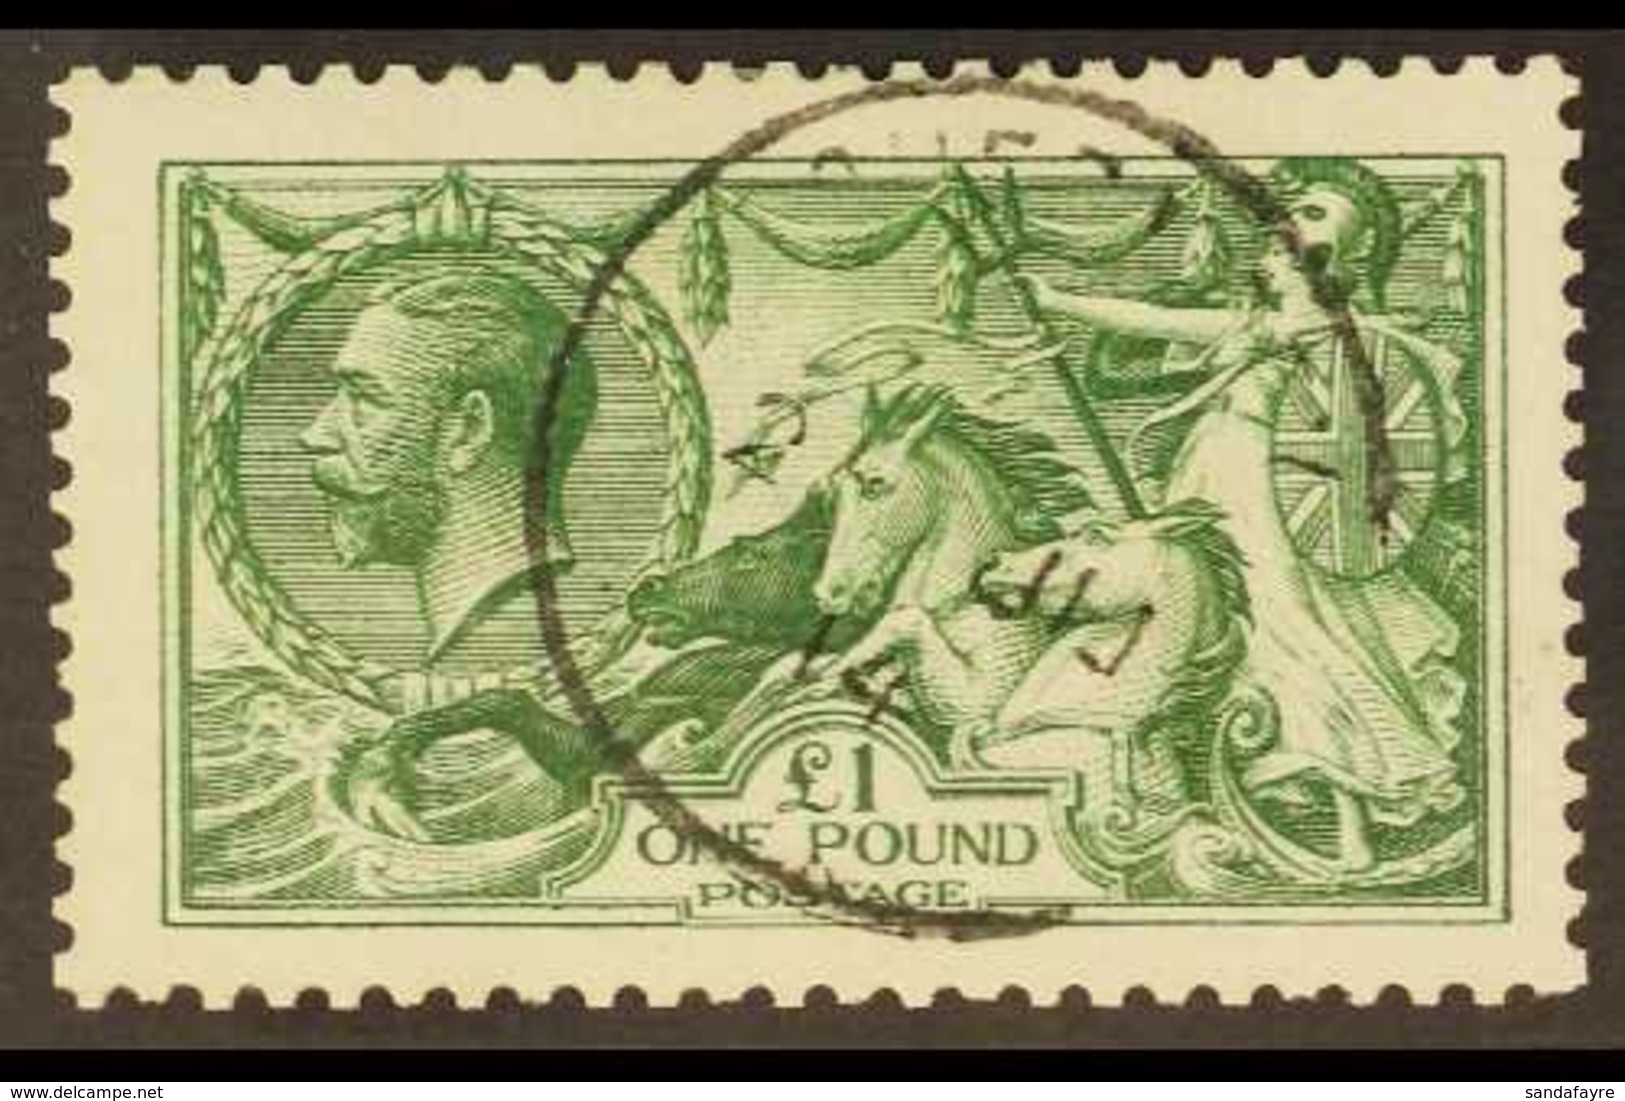 1913 £1 Green, Waterlow Seahorse, SG 403, Superb Used , Well Centred With Central Cds Cancel. A Gem! For More Images, Pl - Ohne Zuordnung